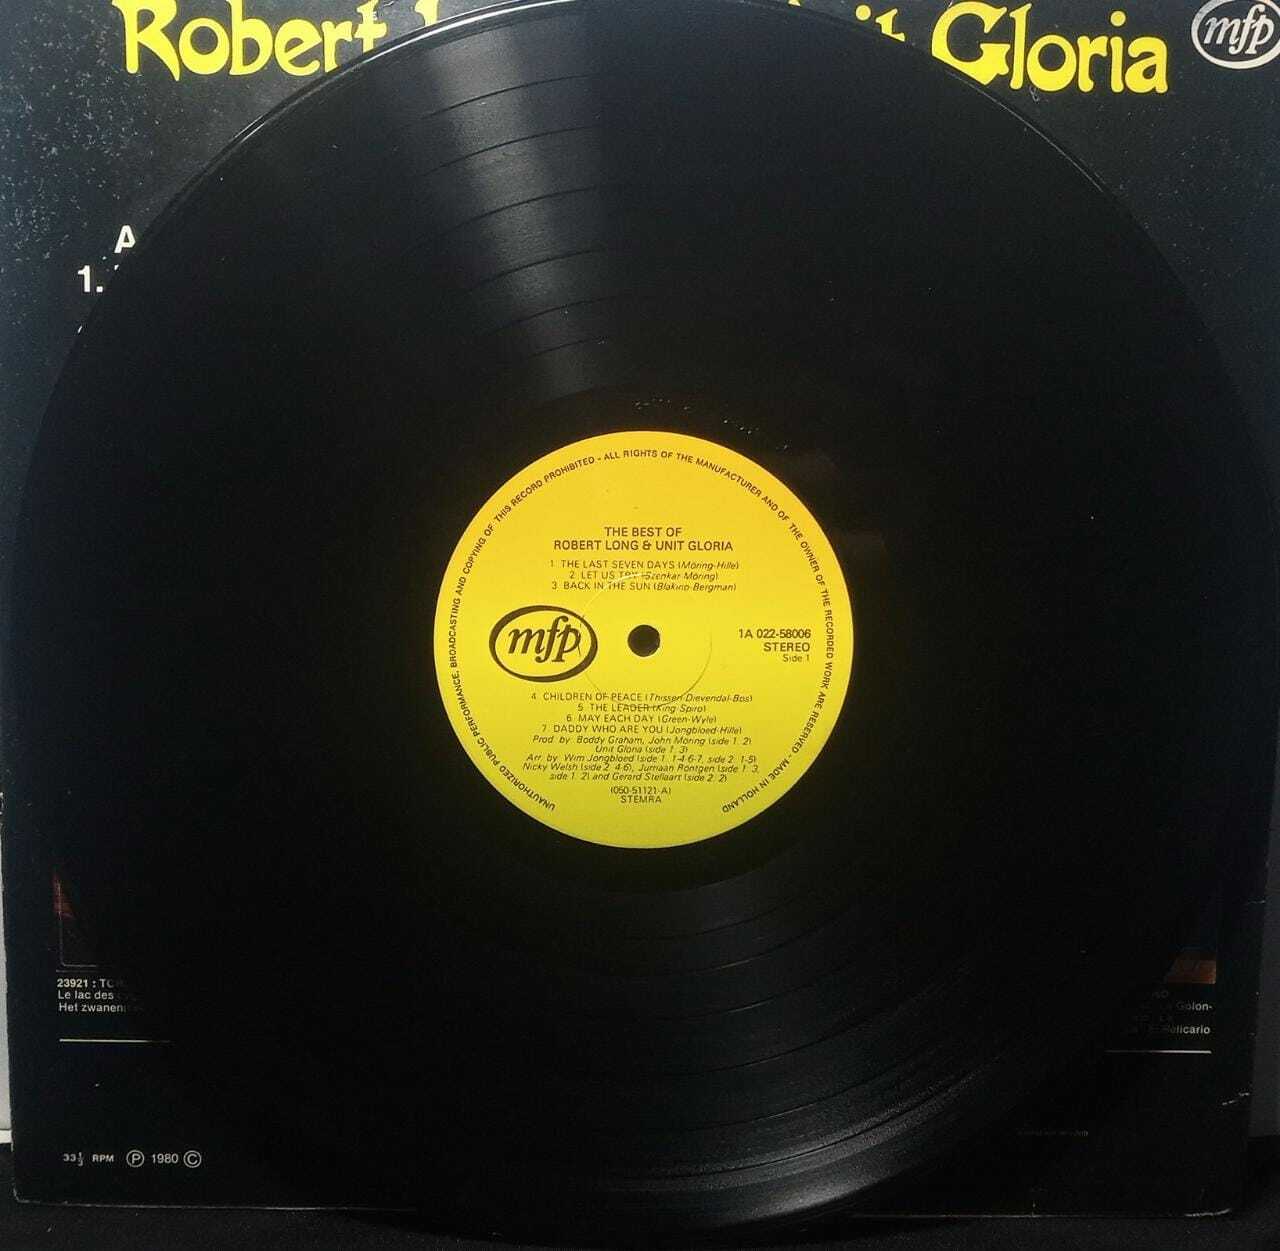 Vinil - Robert Long and Unit Gloria - The Best Of (Holland)